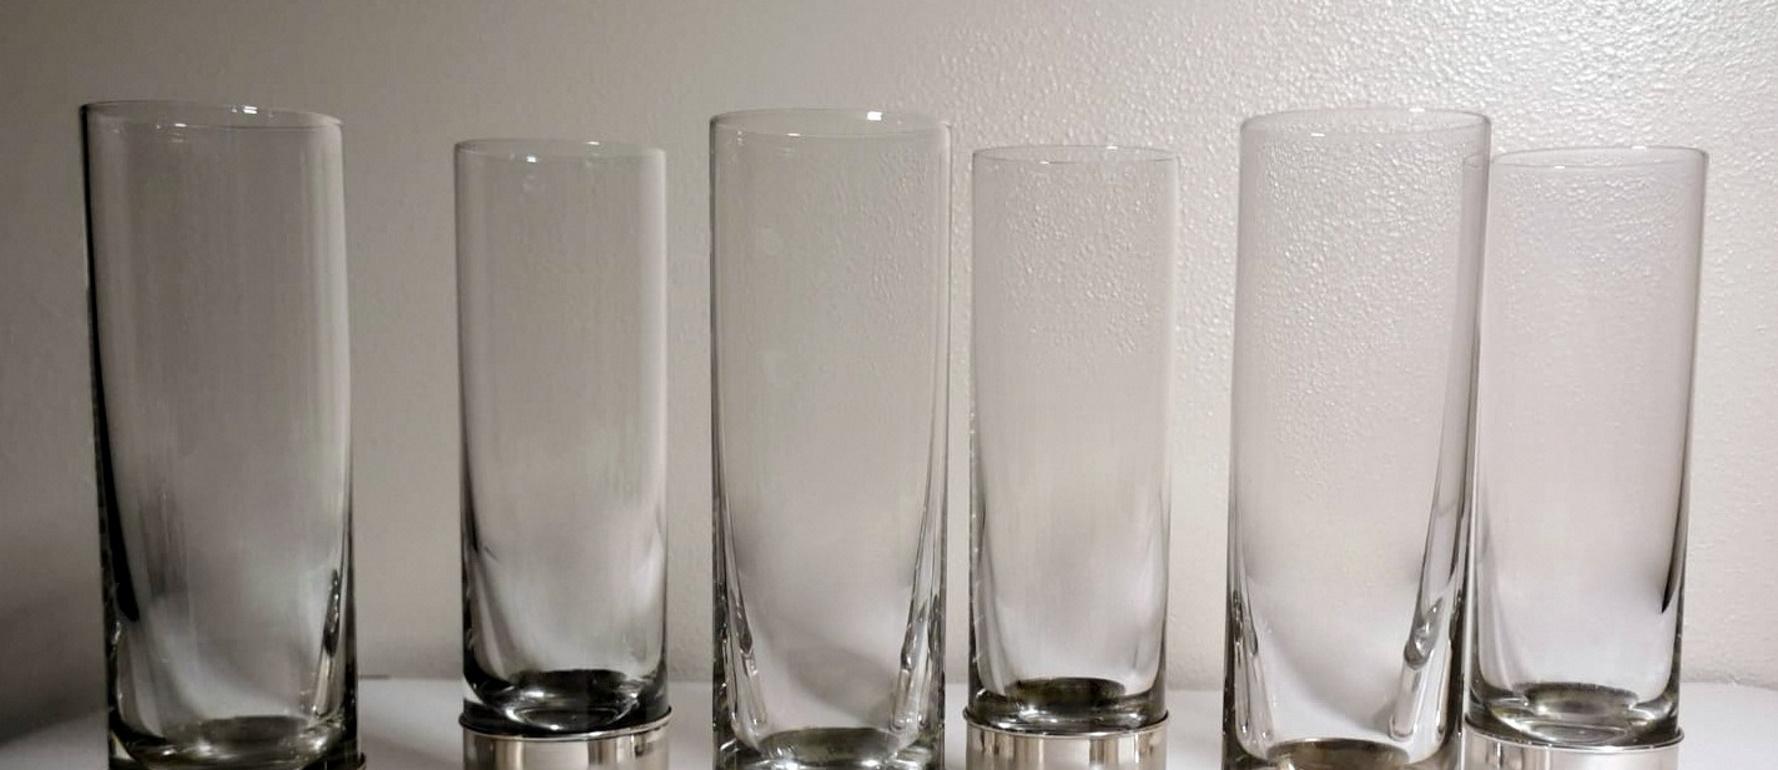 Vintage 6 Florentine Handcrafted Silver and Luxion Crystal Glasses from R.C.R For Sale 6